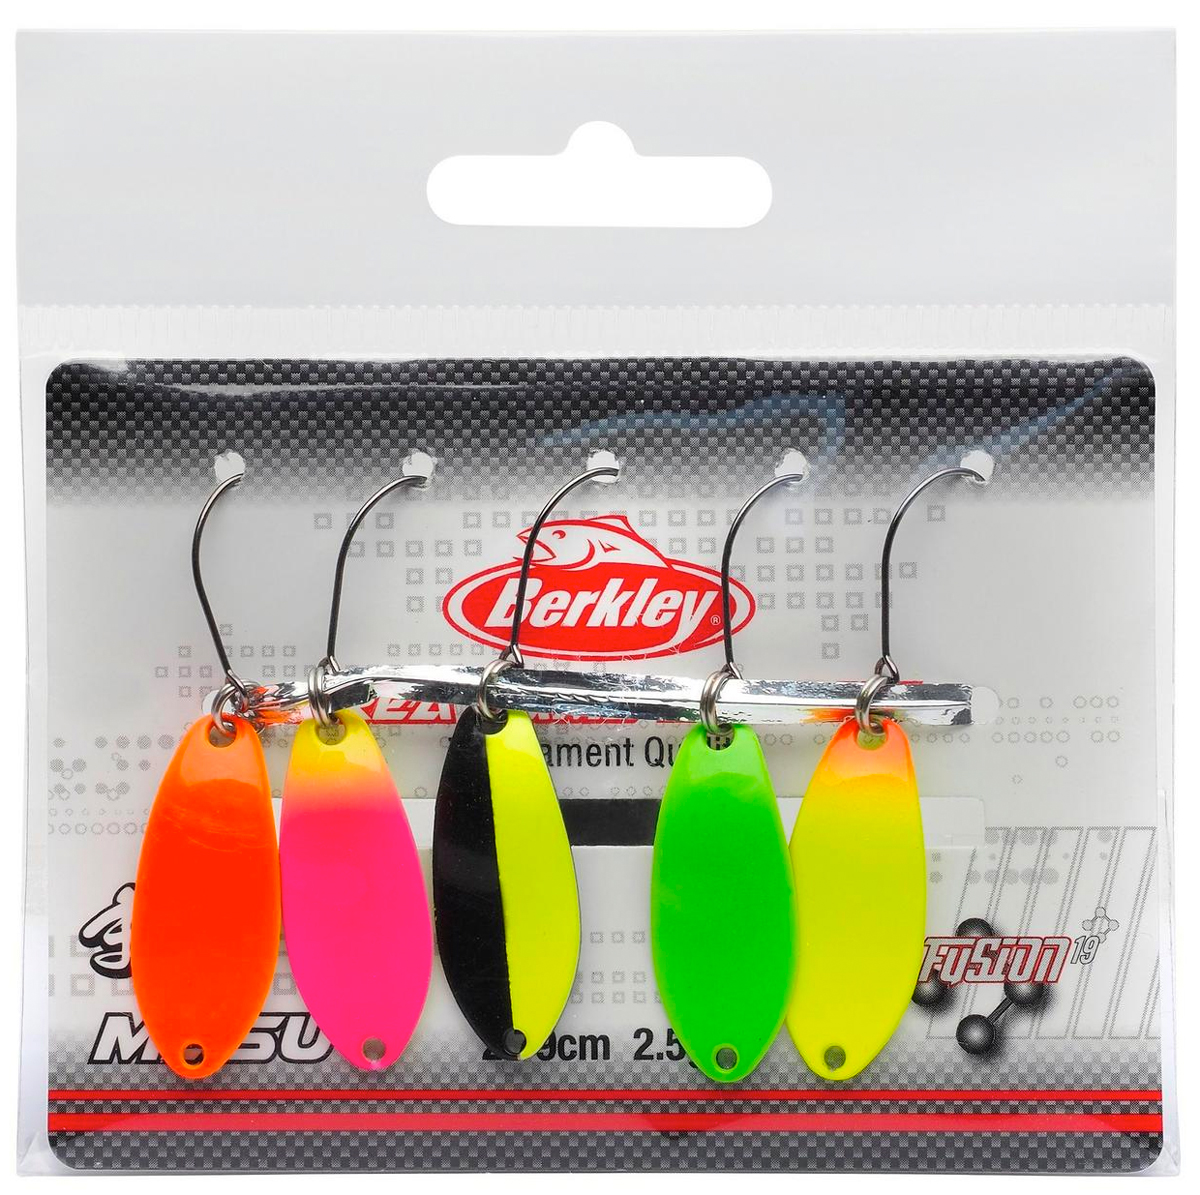 Berkley Roru Area Game Spoons 5 Pack - Trout Fishing Lures Set